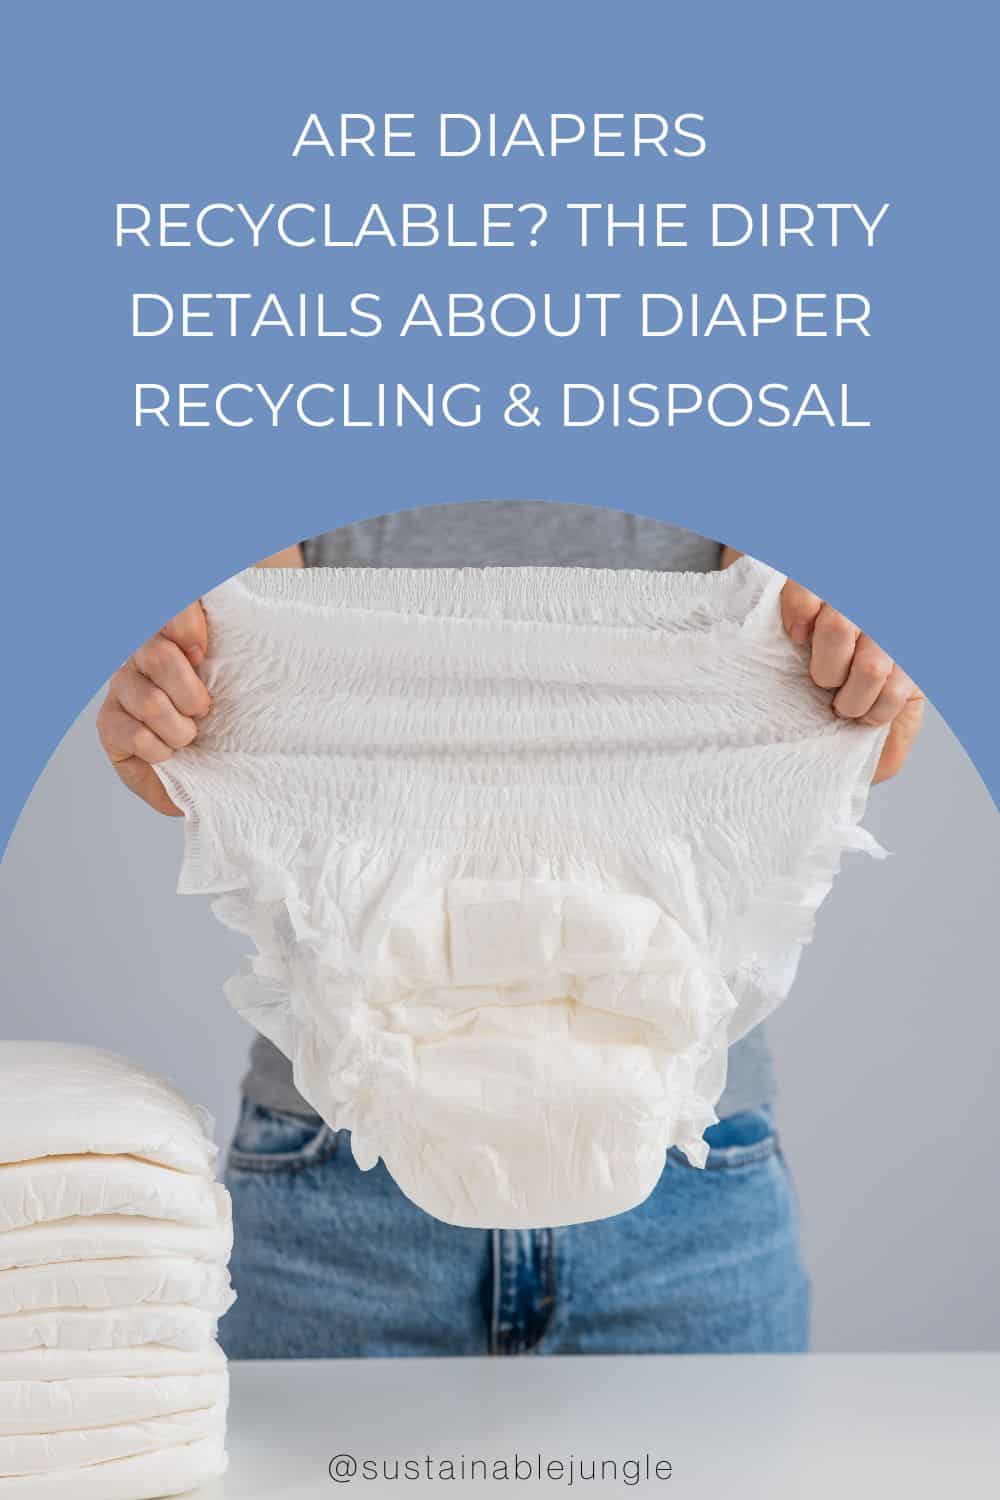 Are Diapers Recyclable? The Dirty Details About Diaper Recycling & Disposal Image by reshetnikov_art mrwed54 #arediapersrecyclable #aredisposablediapersrecyclable #diaperrecycling #canyourecyclediapers #recyclablediapers #recyclediapers #sustainablejungle